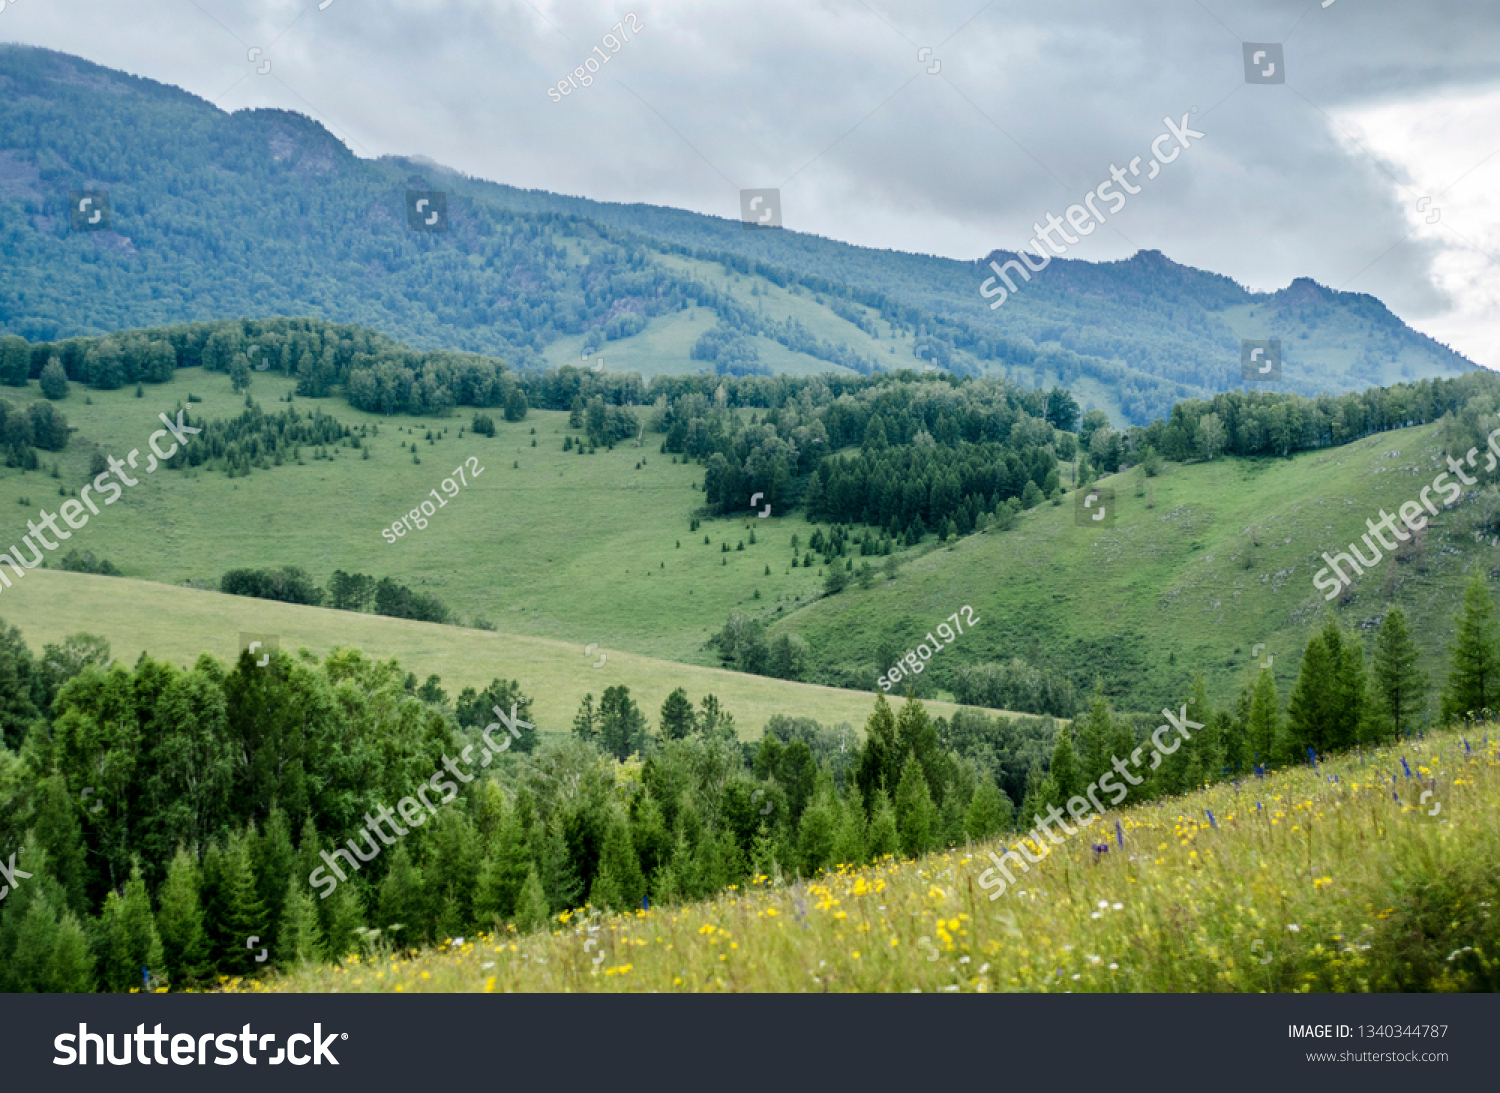  mountain taiga with forest, field, mountains and sky with clouds on a summer day. #1340344787